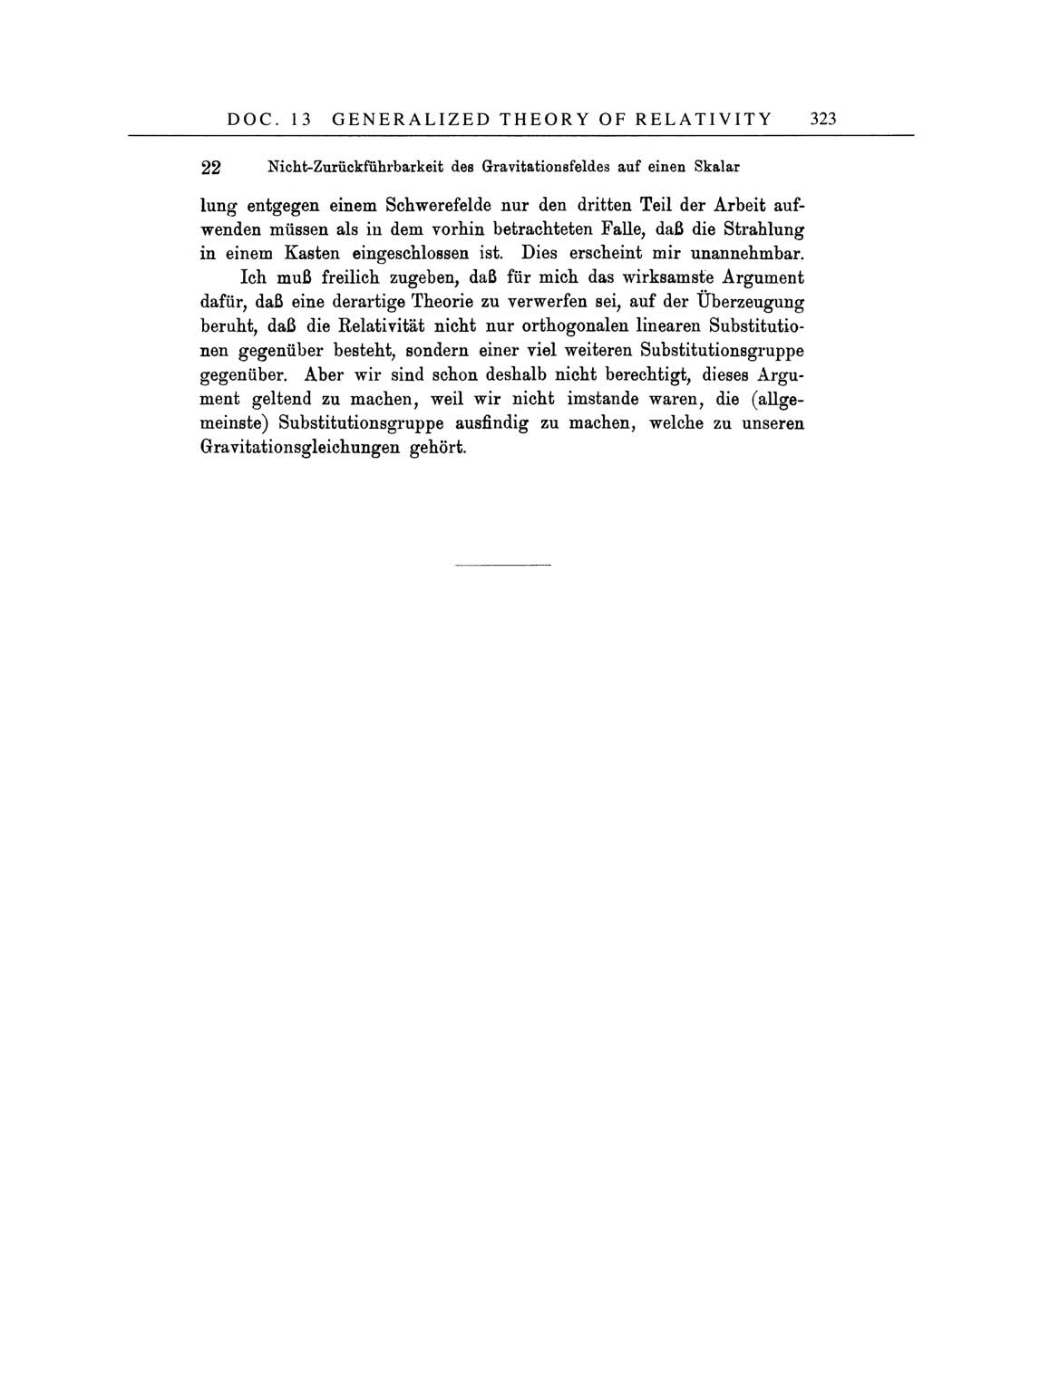 Volume 4: The Swiss Years: Writings 1912-1914 page 323